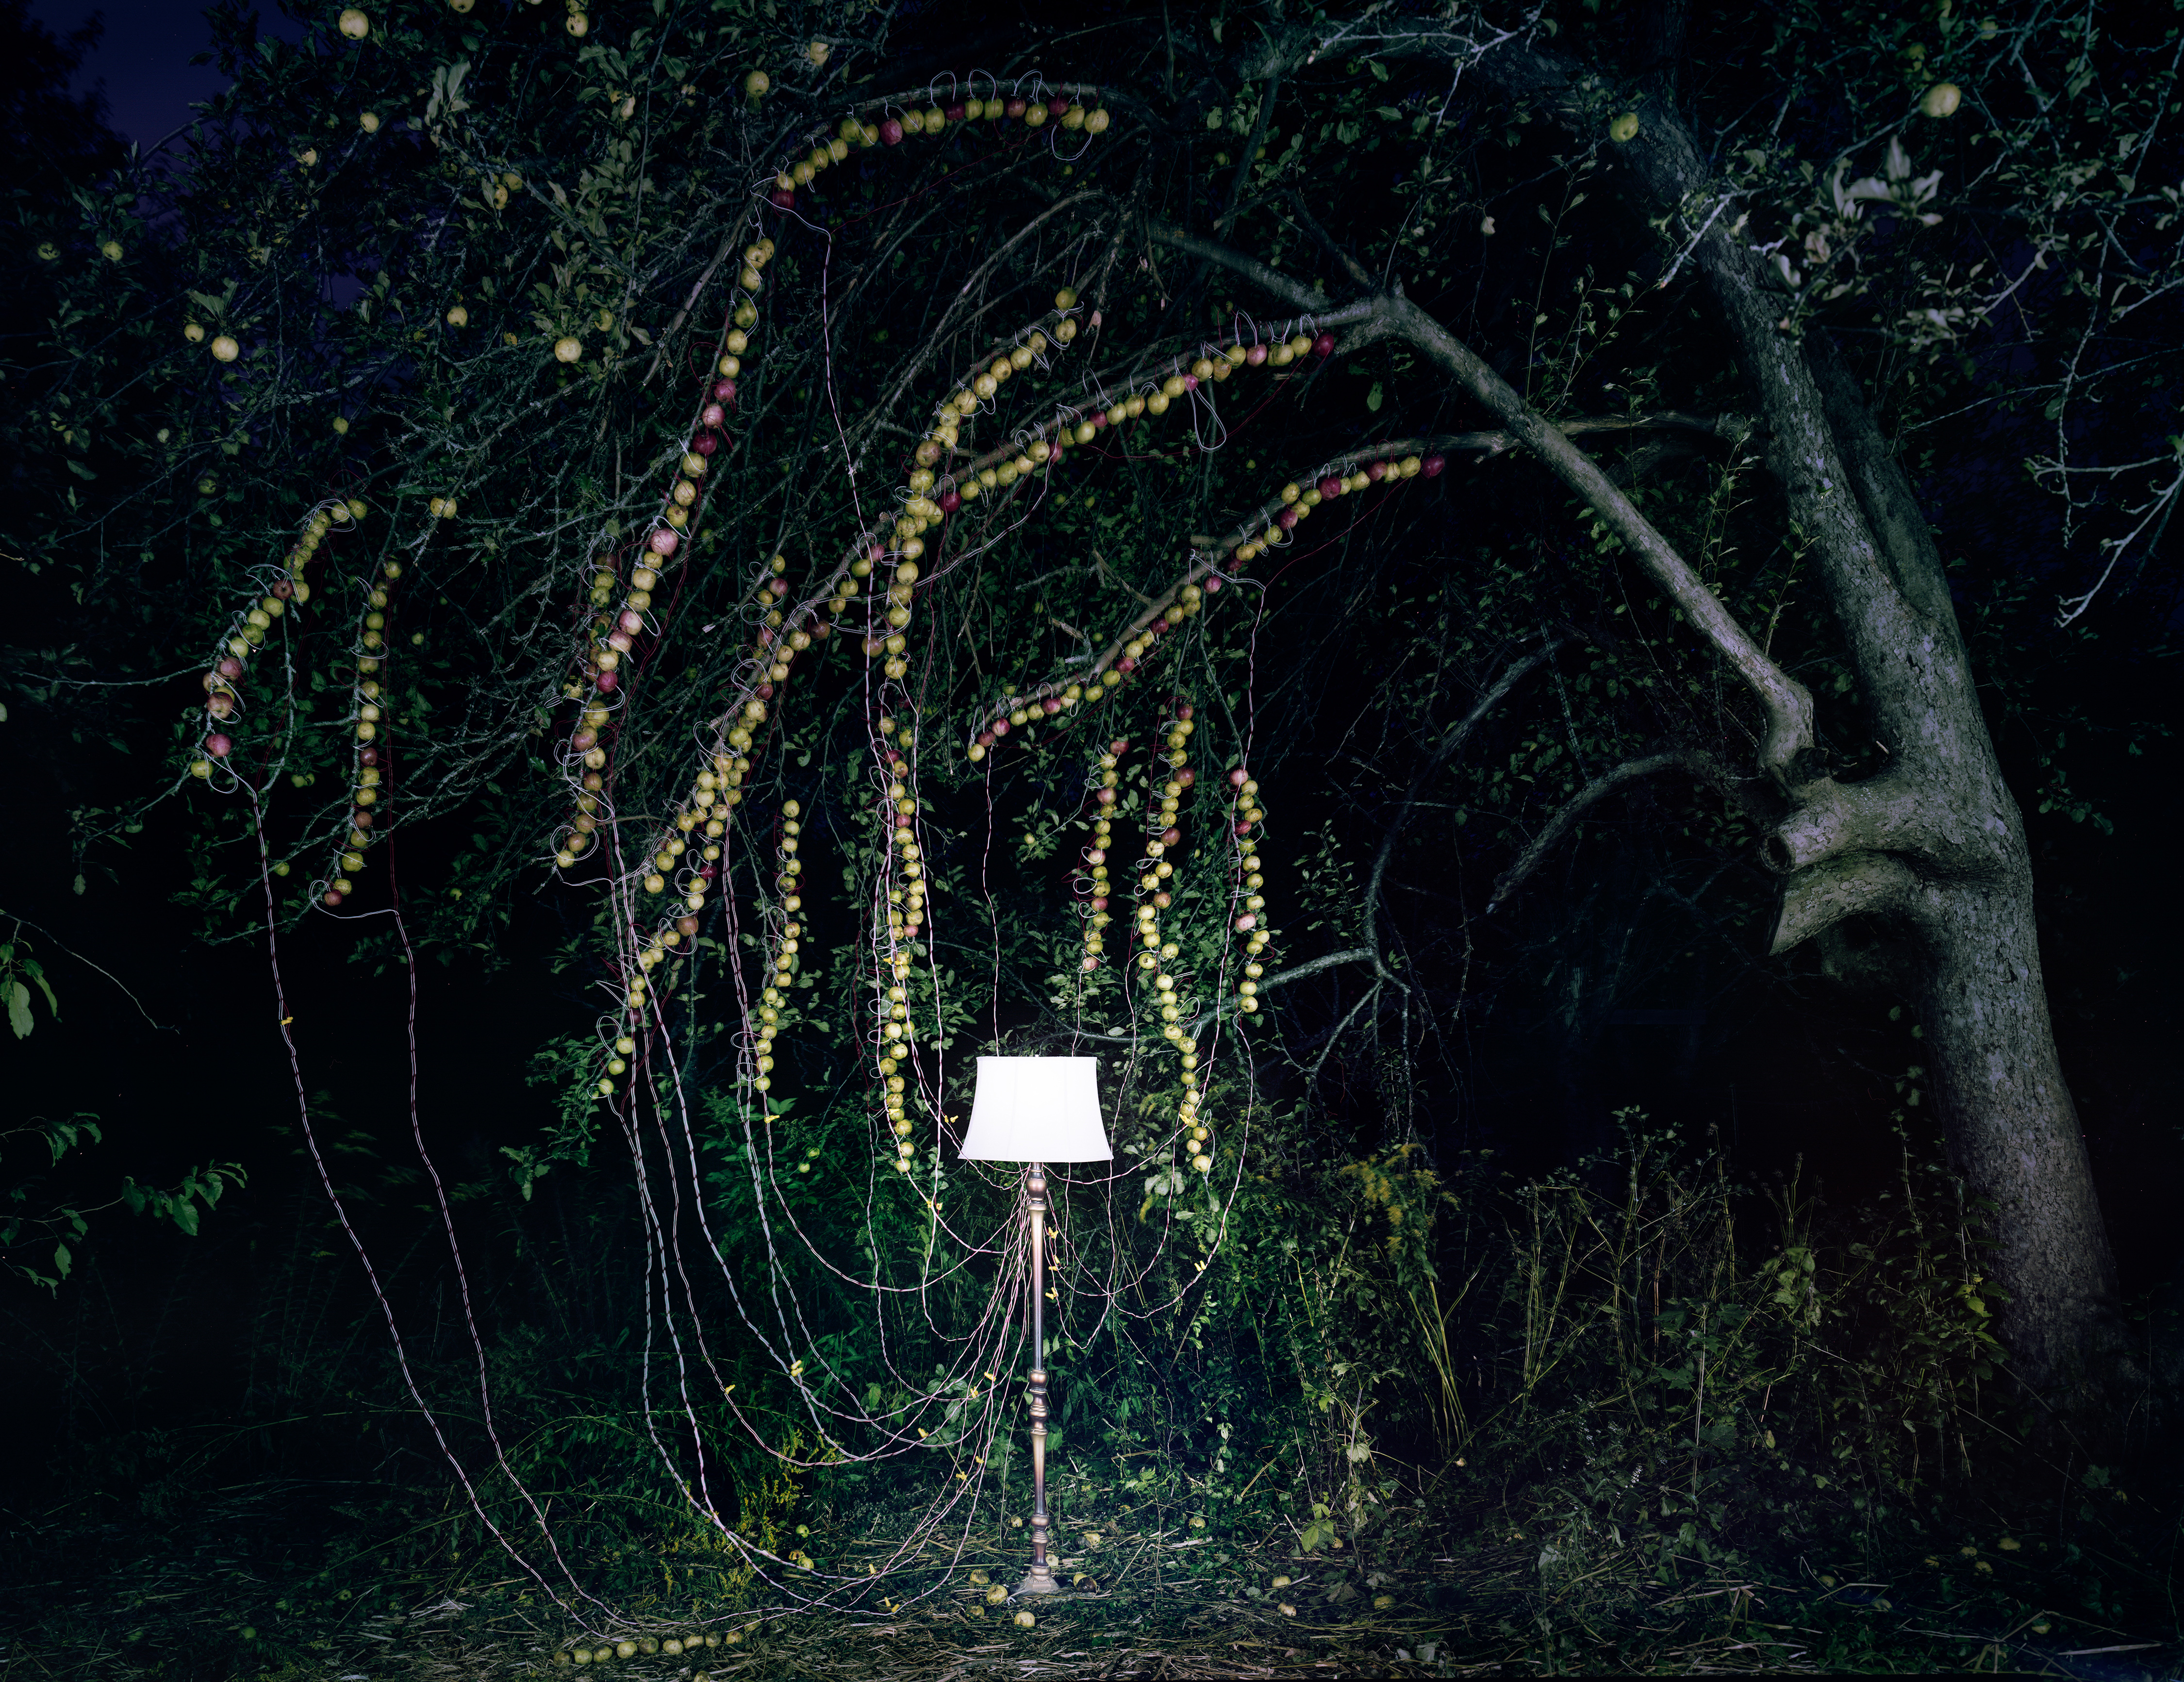 Back to Light - Arched Tree with LEDs, 2013